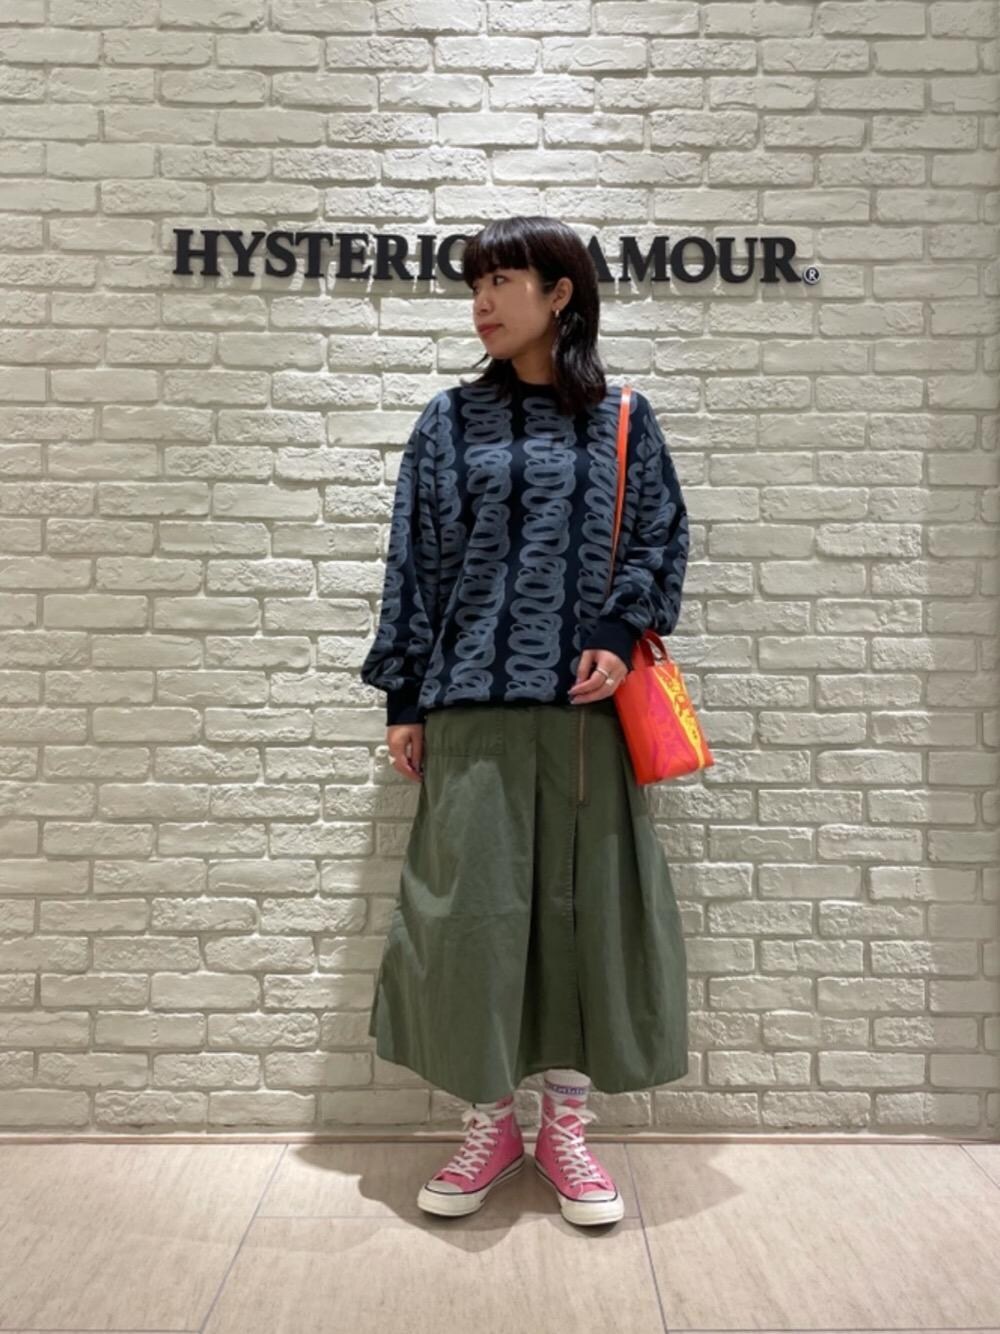 HYSTERIC GLAMOUR（ヒステリックグラマー）の「SNAKE LOOP柄 